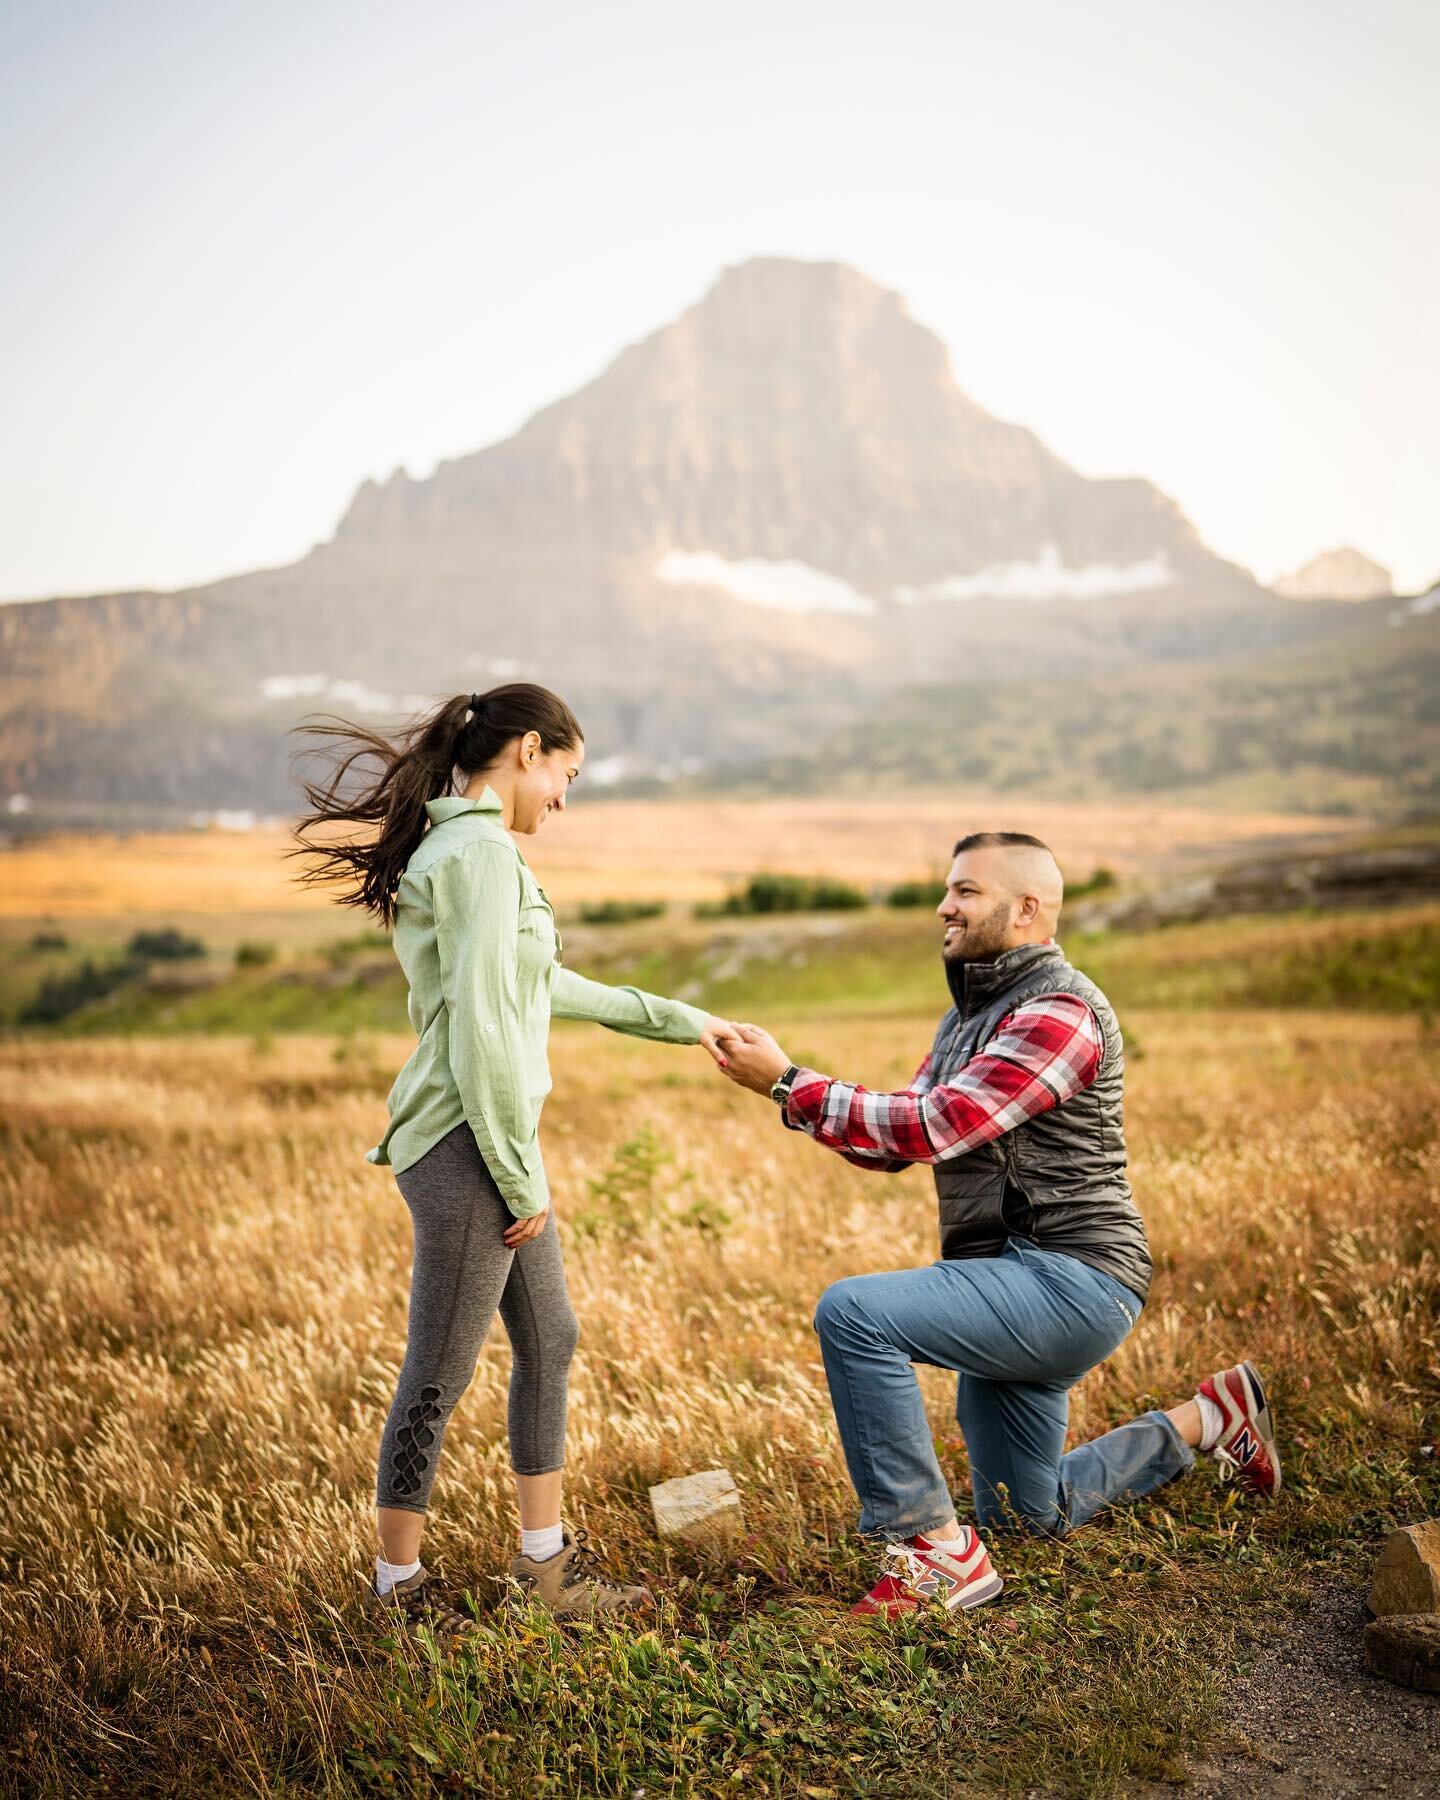 Engagement season is in full swing!

David here! As you probably know, my wife and I love traveling. A few months ago, we were hiking in Glacier National Park and we bumped into an amazing couple that freshly popped the big question! 💍 @2shar3vedi &